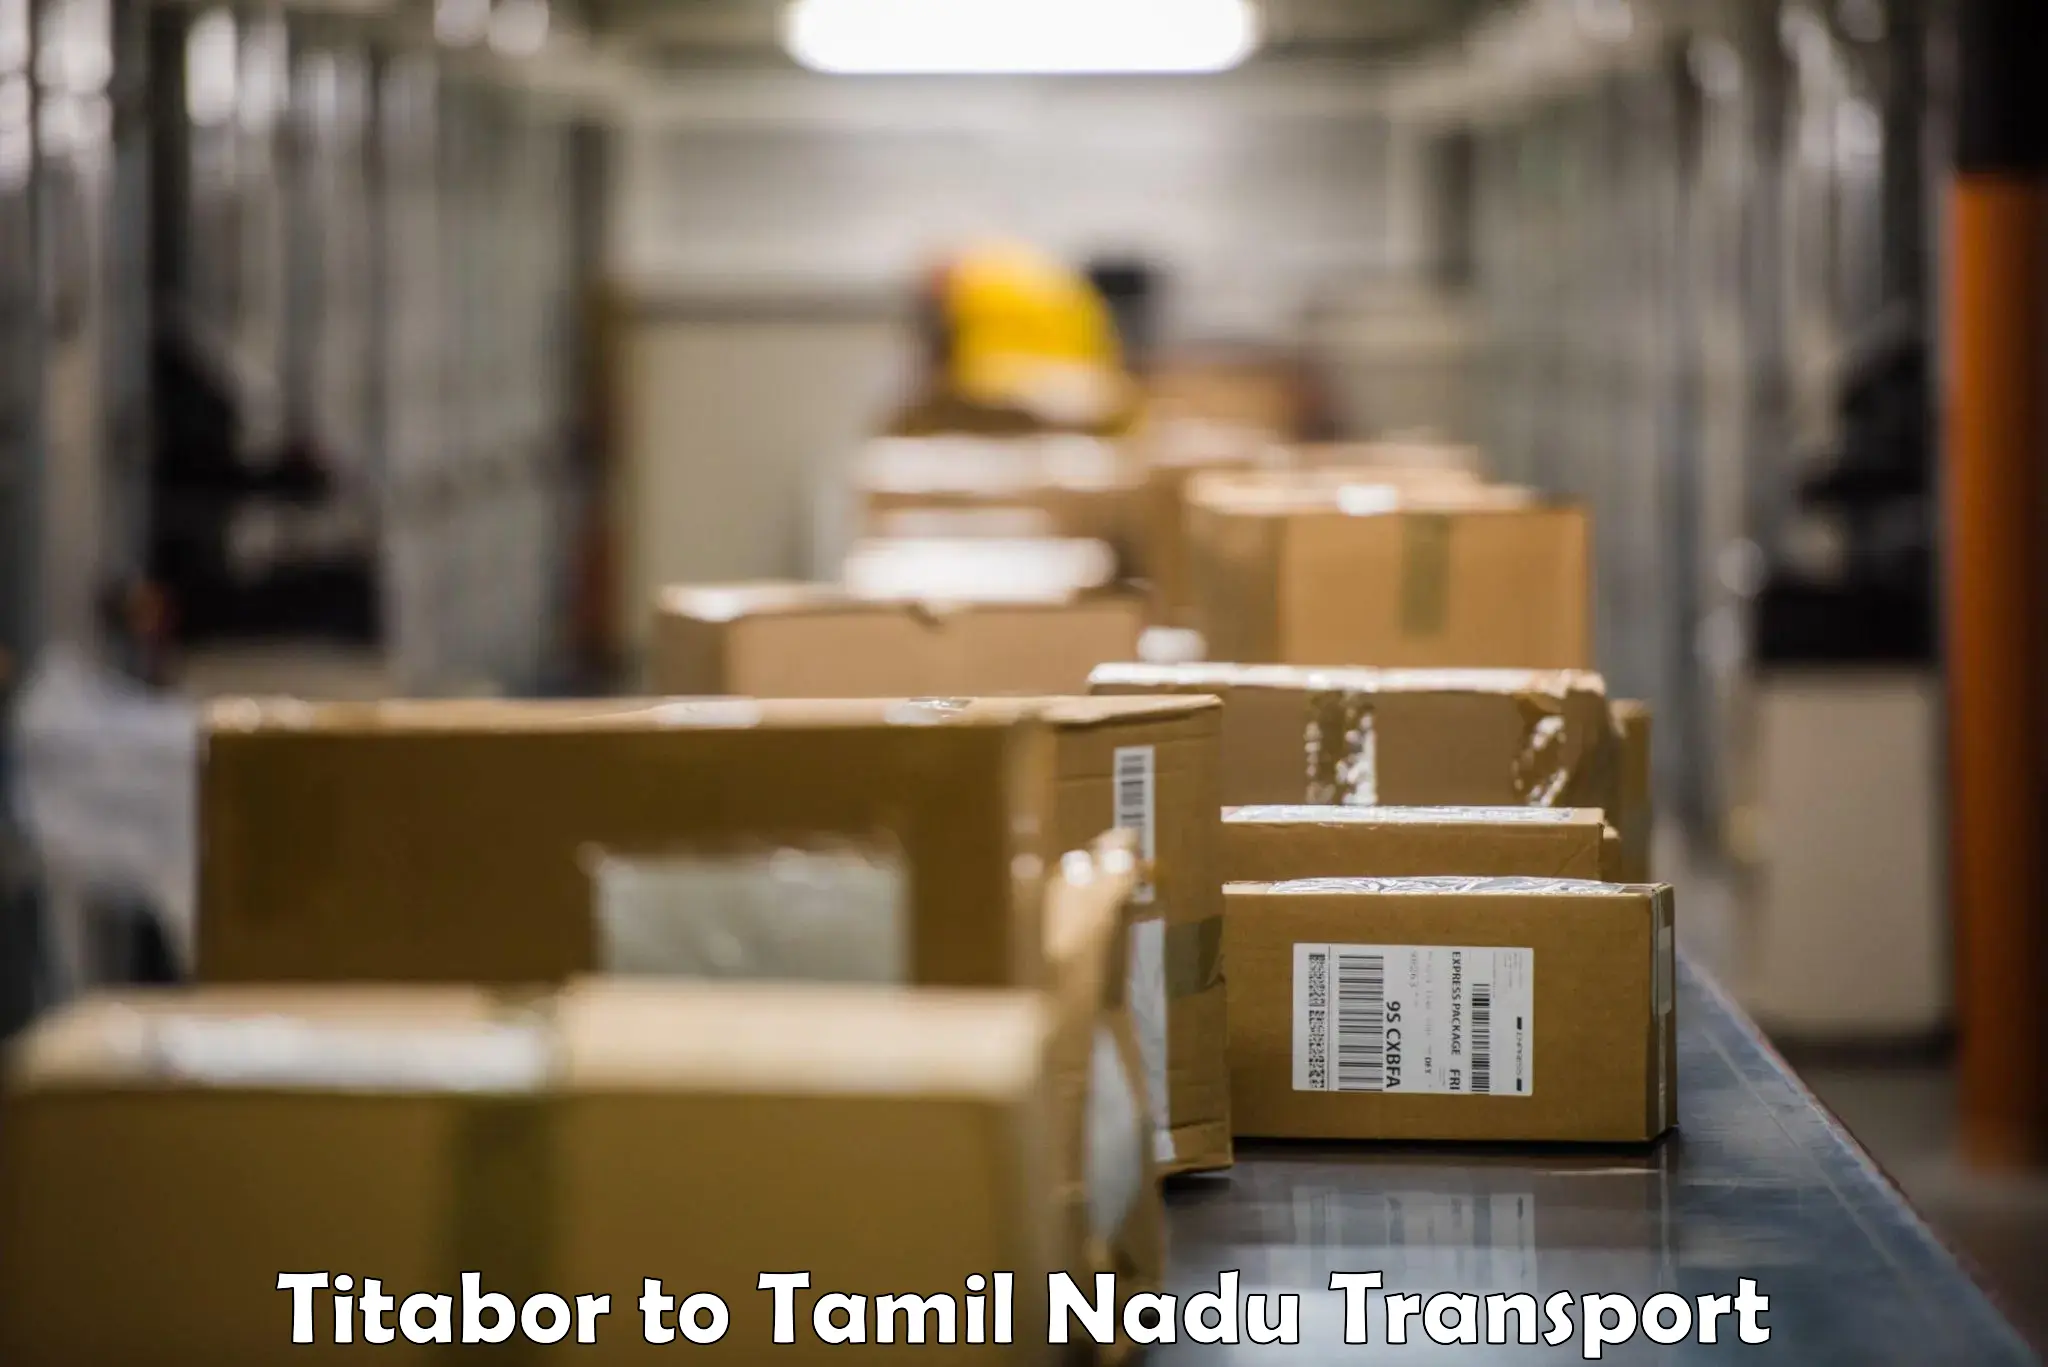 Transport bike from one state to another Titabor to Thiruthuraipoondi